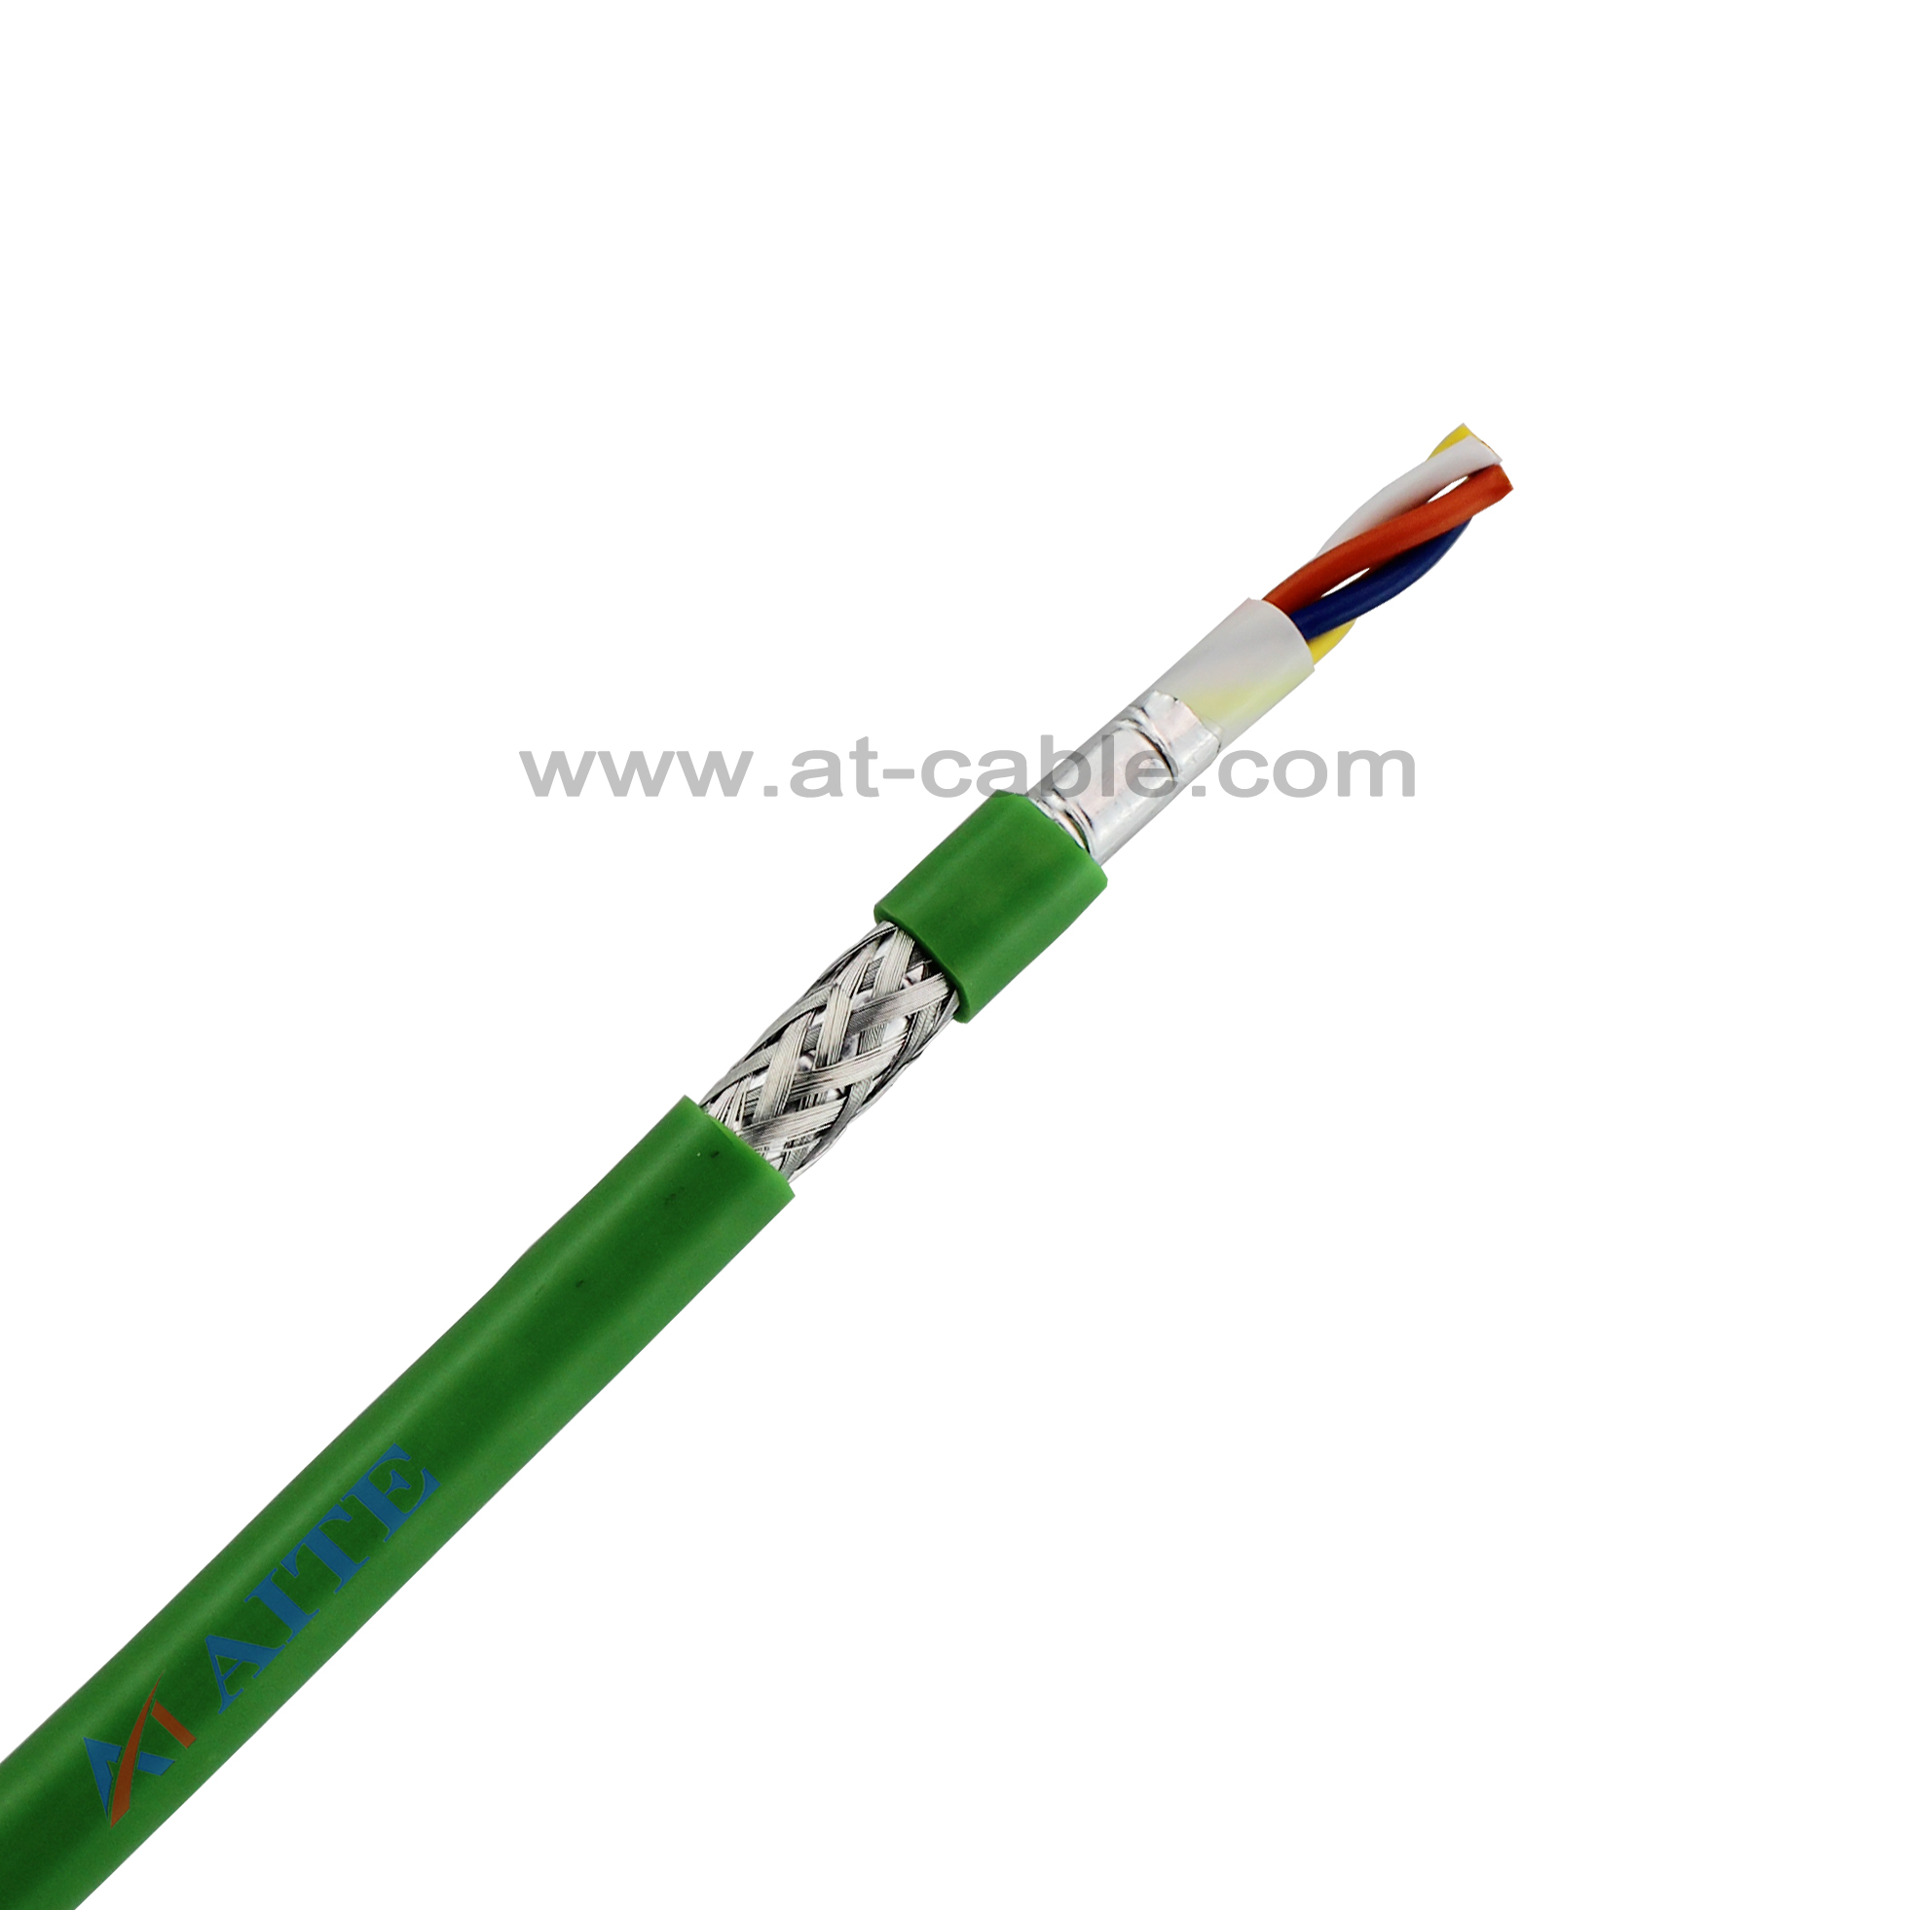 Profinet cable-Type A